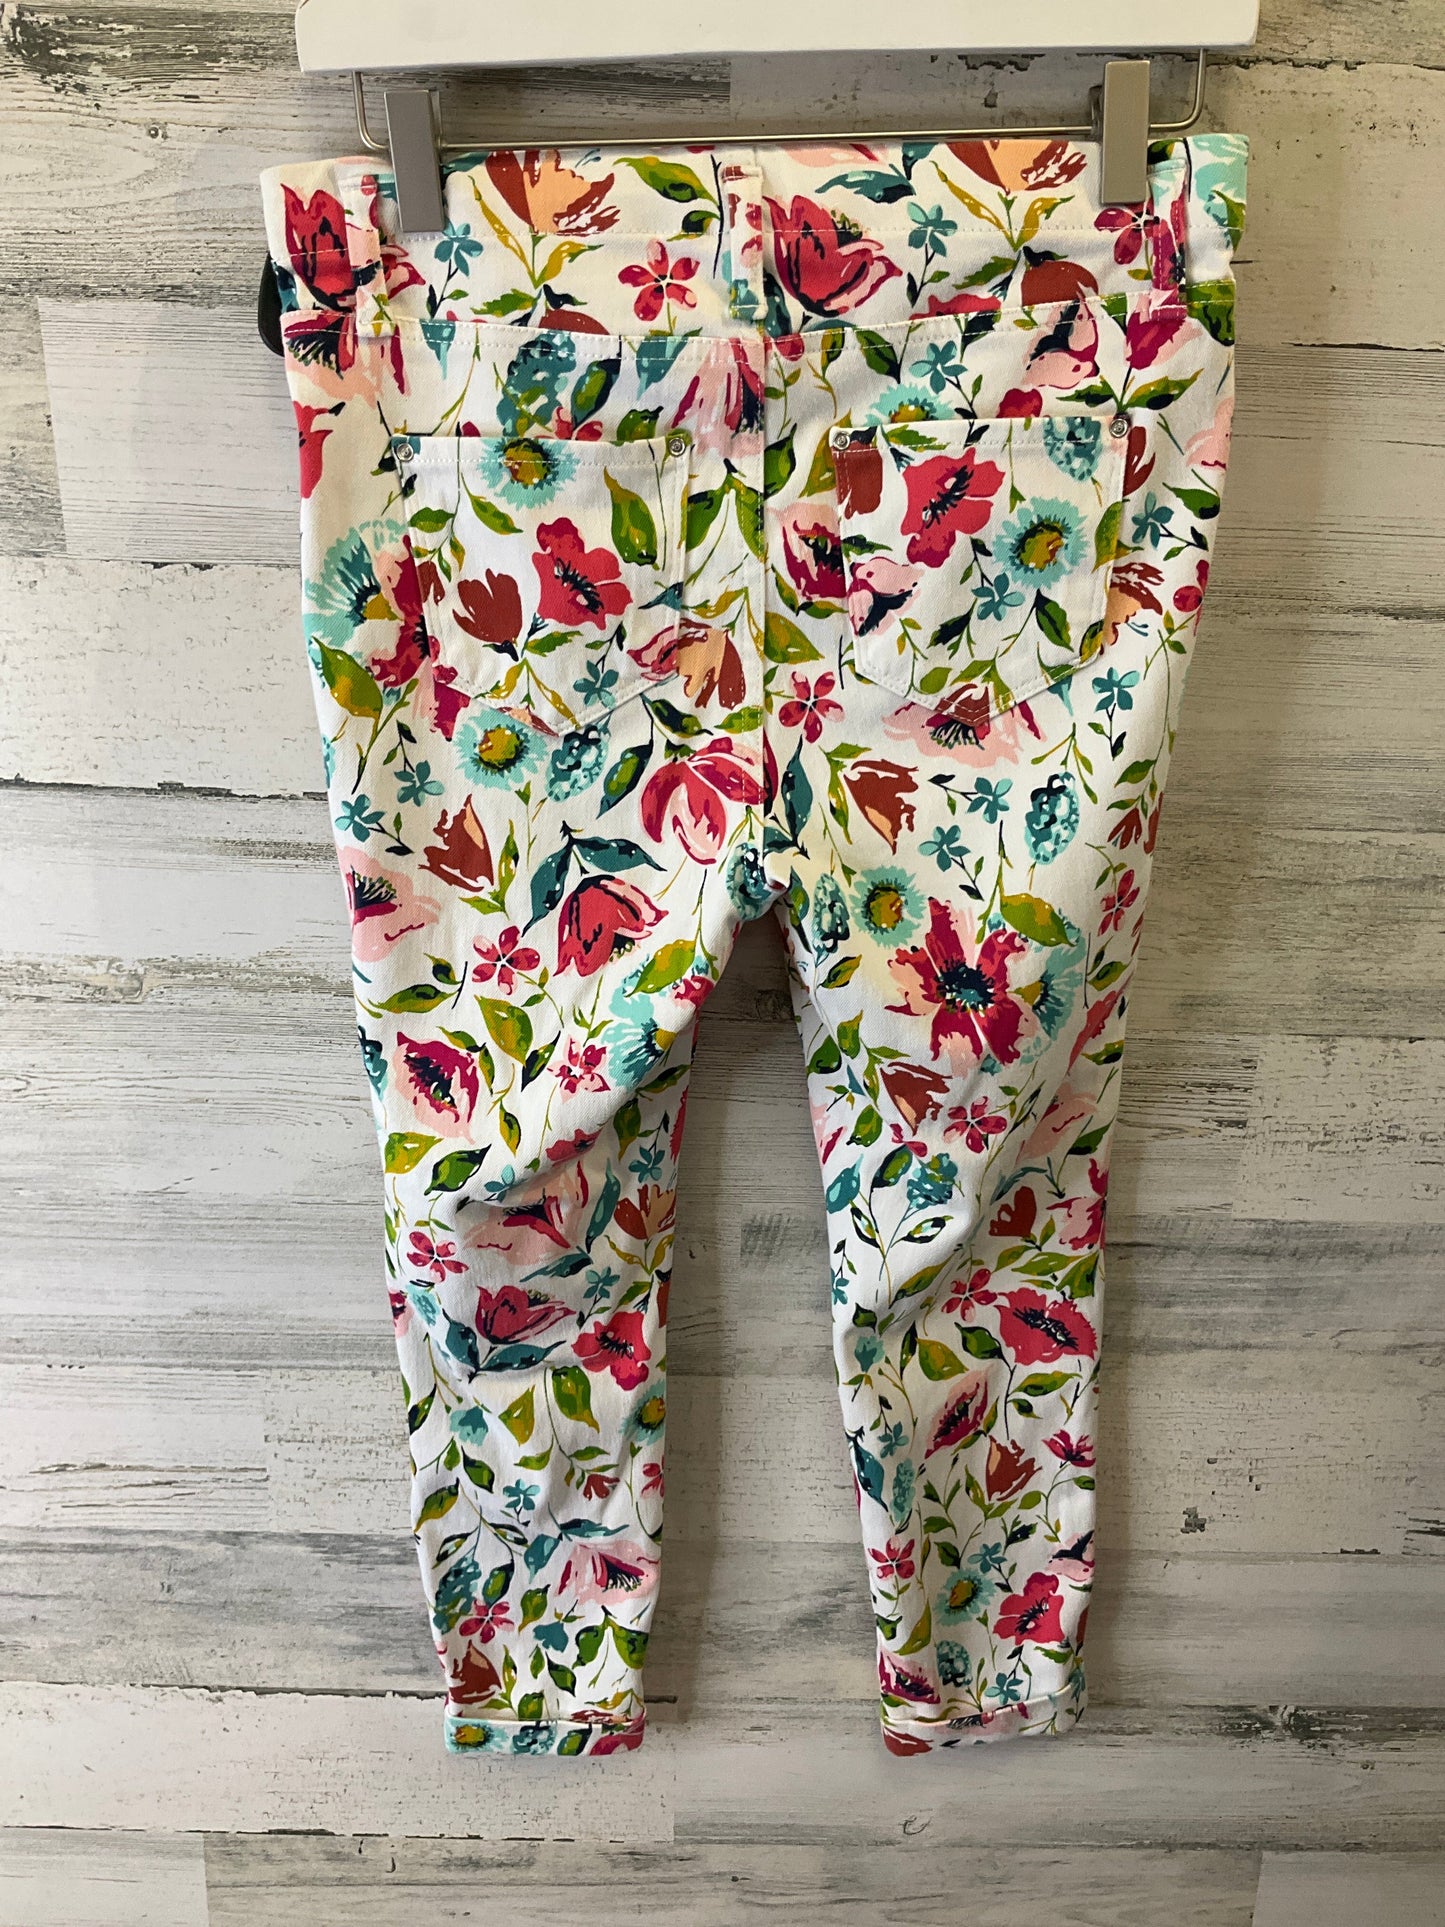 Floral Print Pants Leggings Time And Tru, Size 8